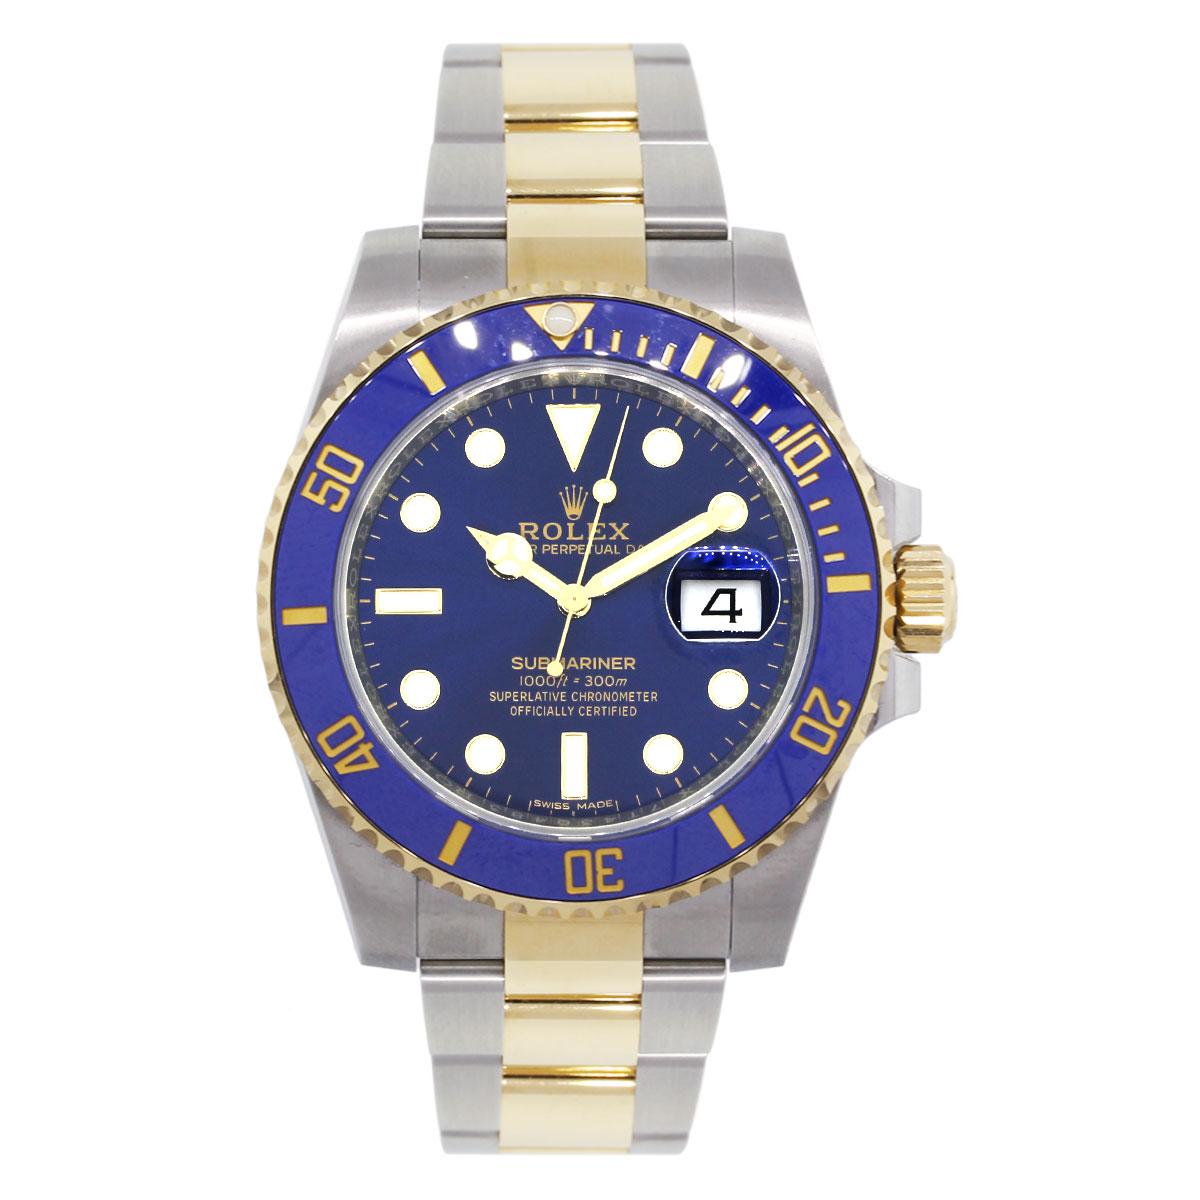 Brand: Rolex
MPN: 116613LB
Model: Submariner
Case Material: Stainless steel
Case Diameter: 40mm
Crystal: Sapphire crystal
Bezel: Blue ceramic bezel
Dial: Blue dial
Bracelet: 18k yellow gold and stainless steel oyster band
Size: Will fit a 8″